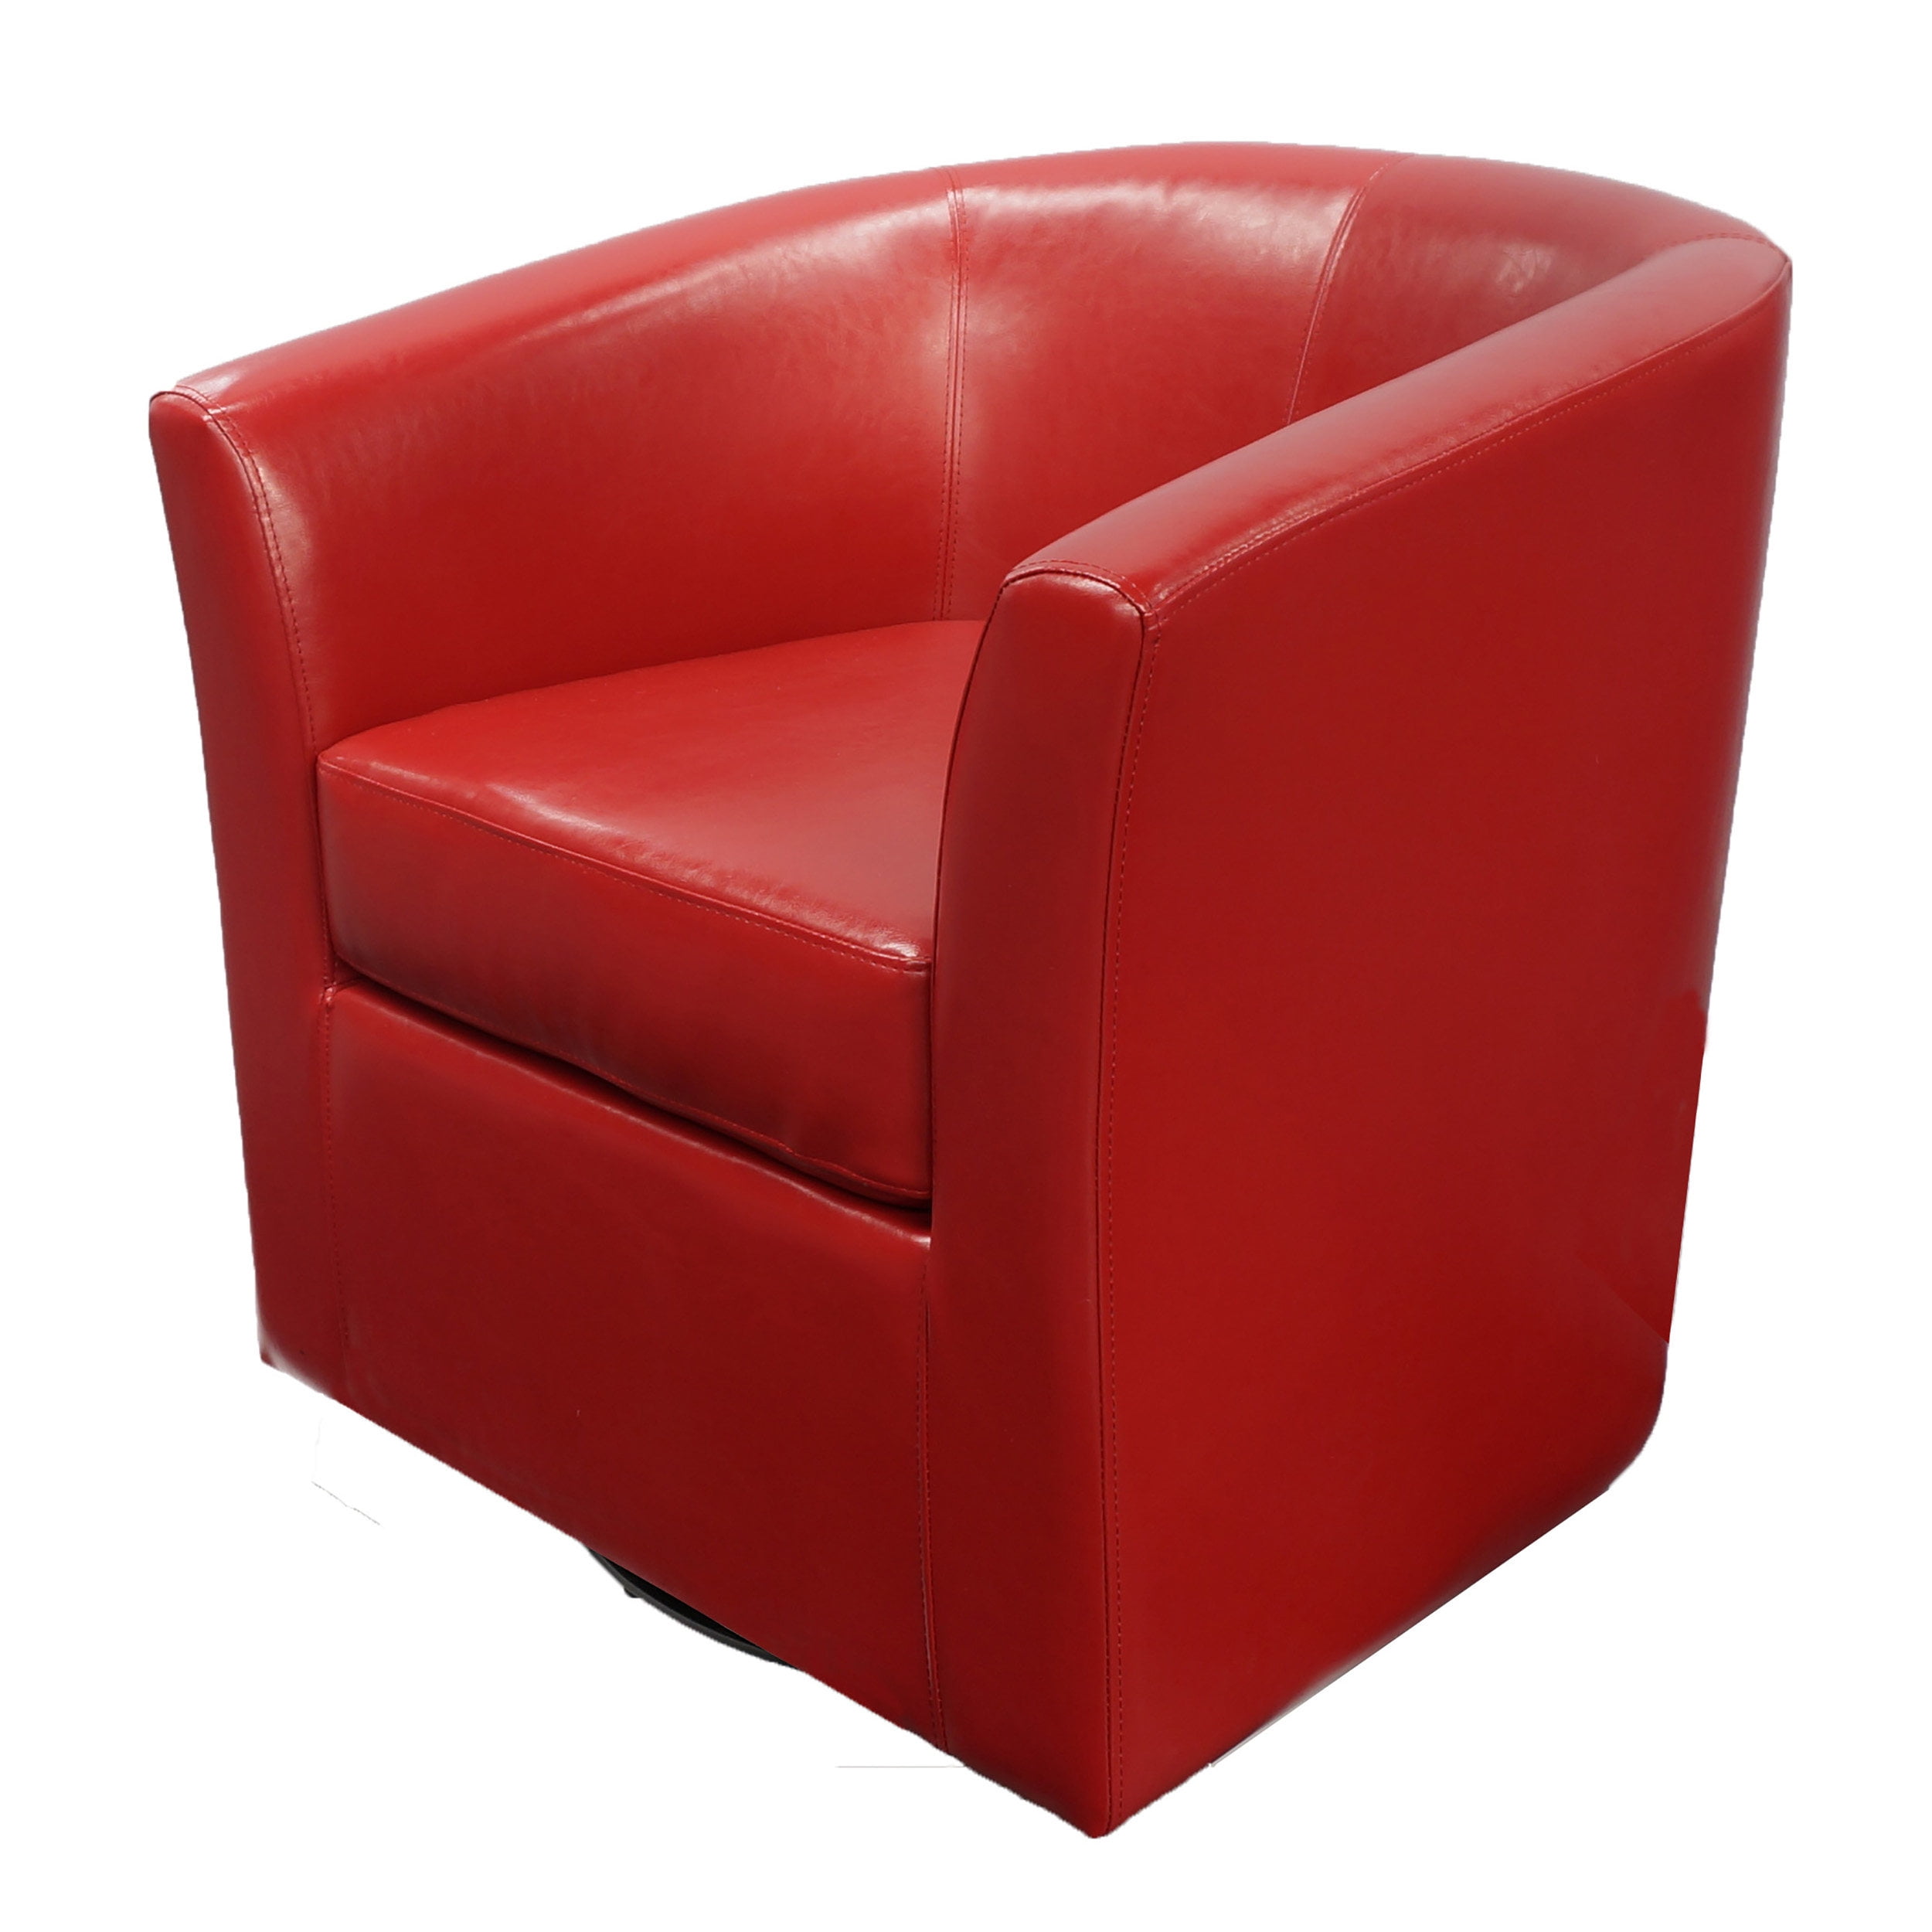 Porsche Indoor Red Faux Leather Swivel, Swivel Barrel Chair Faux Leather